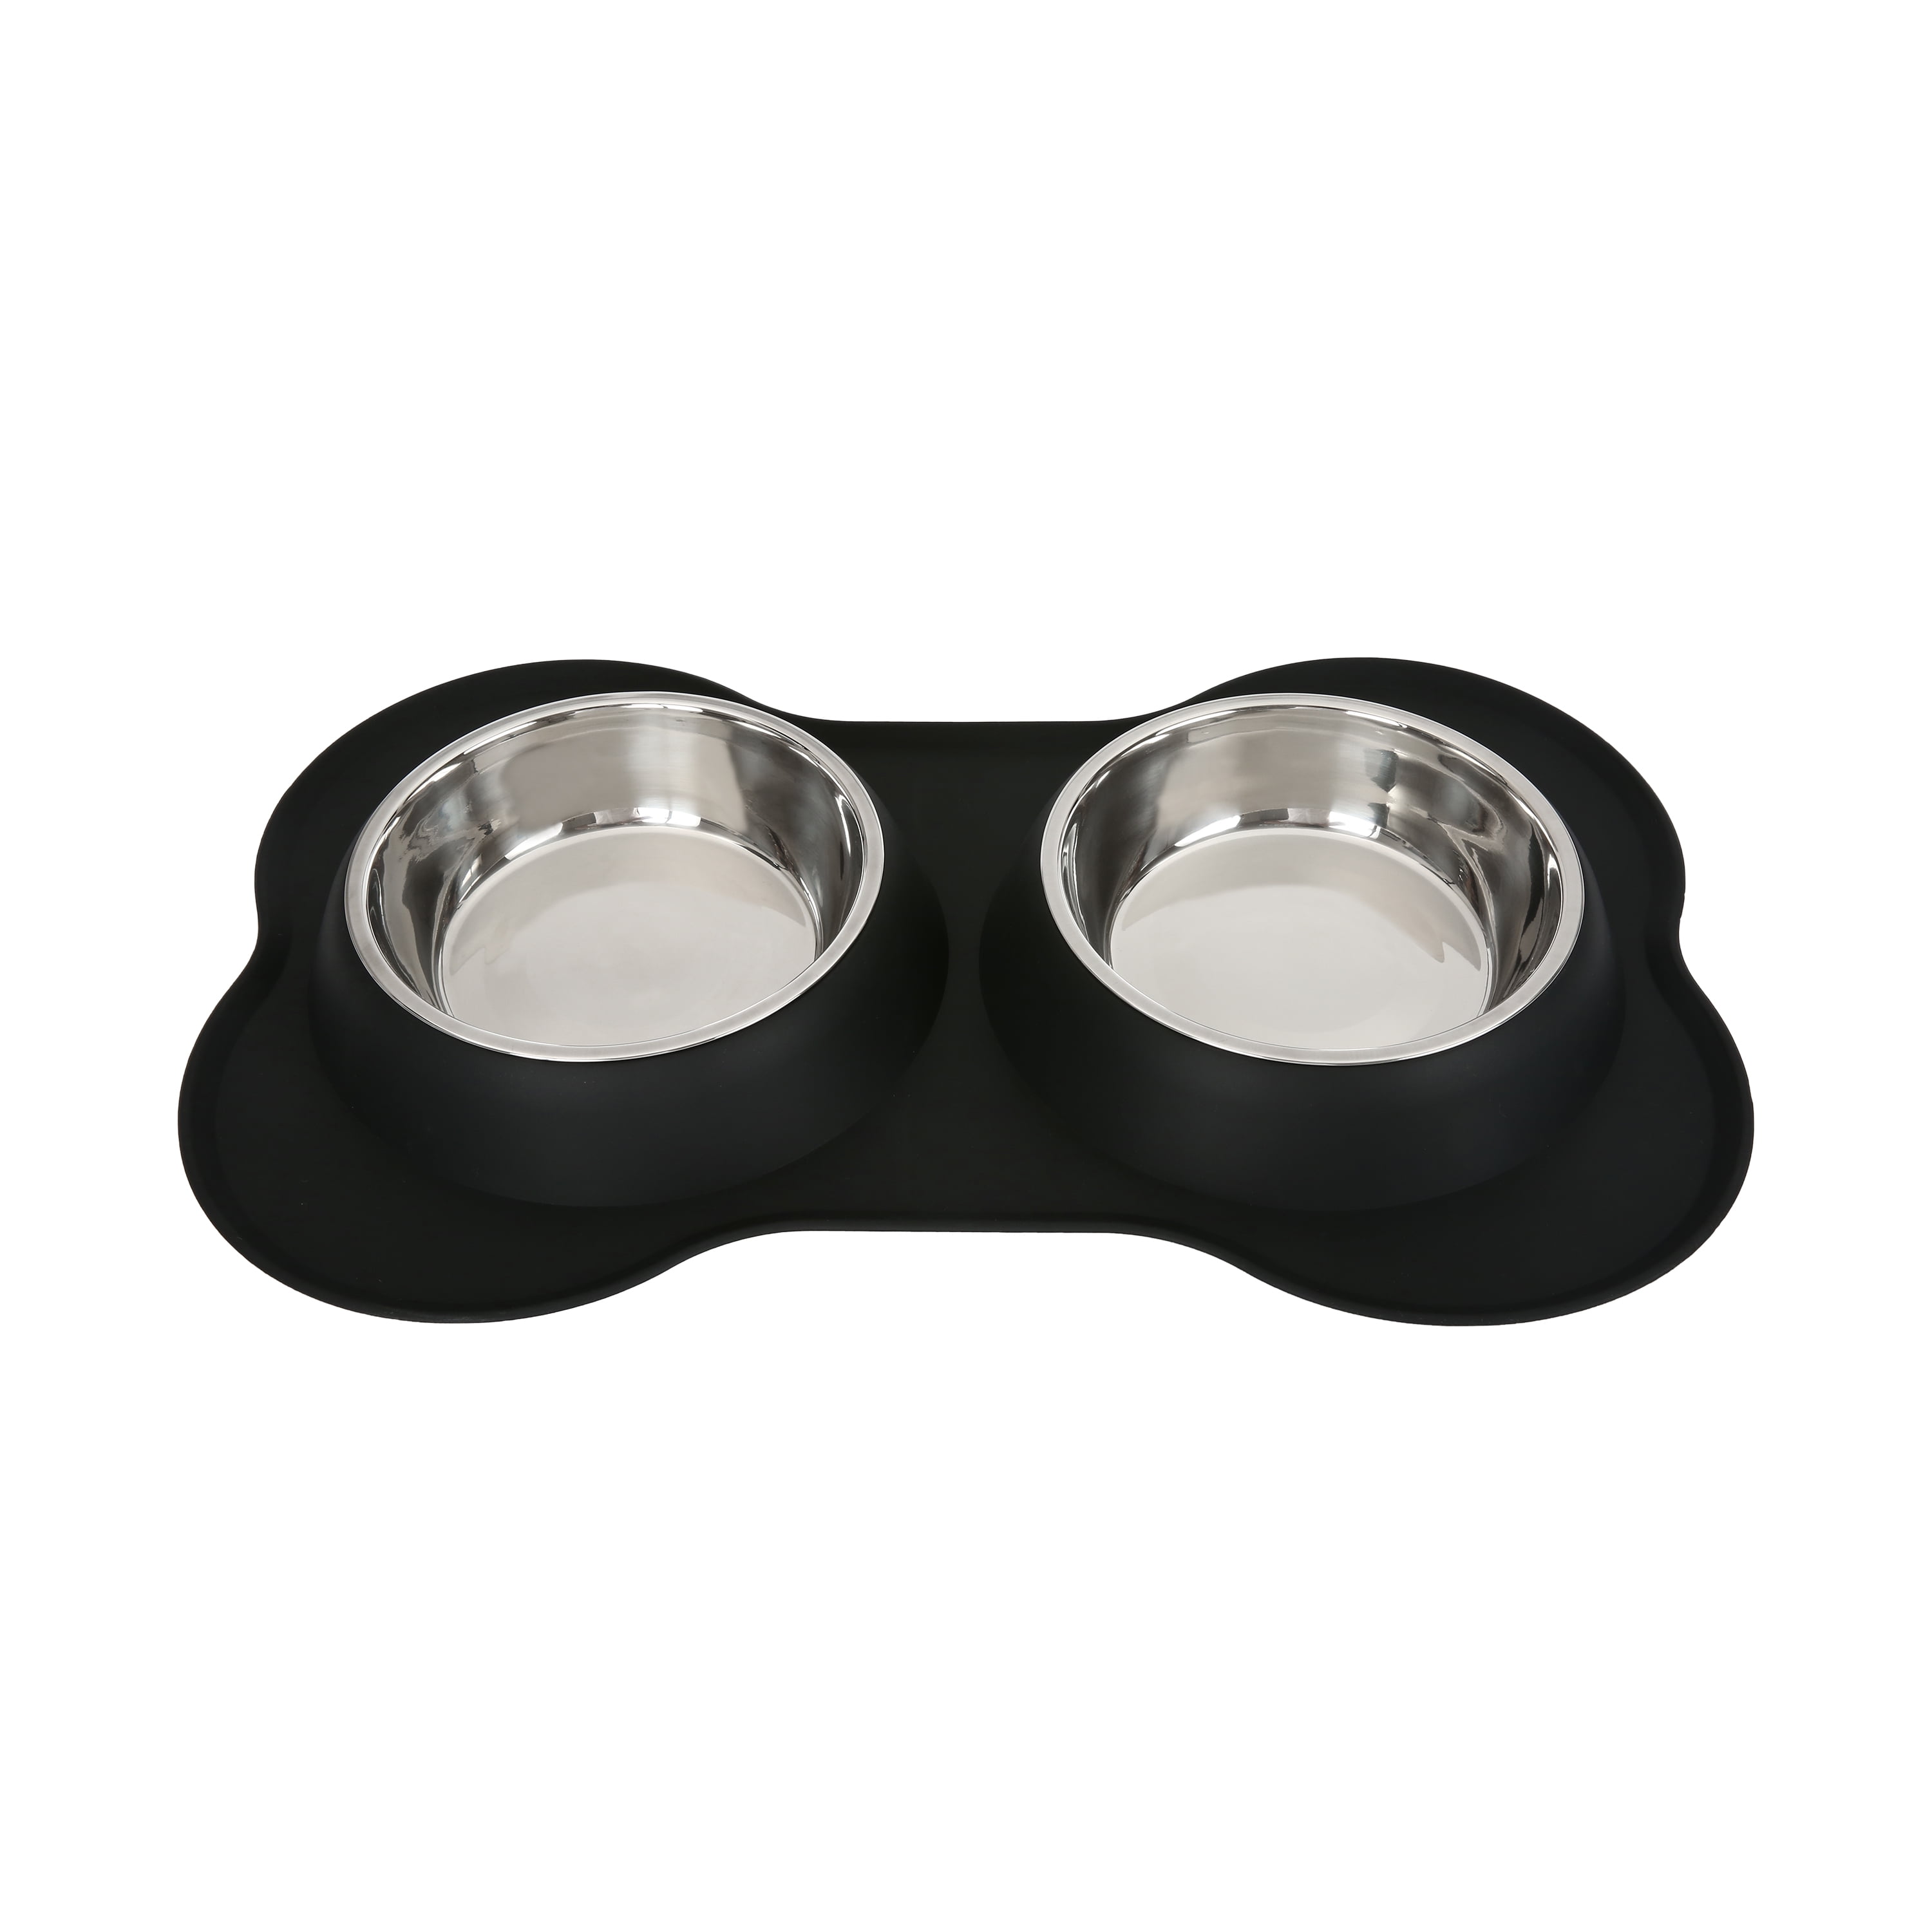 Vivaglory Dog Bowls Set with Double Stainless Steel Feeder Bowls and W –  VIVAGLORY